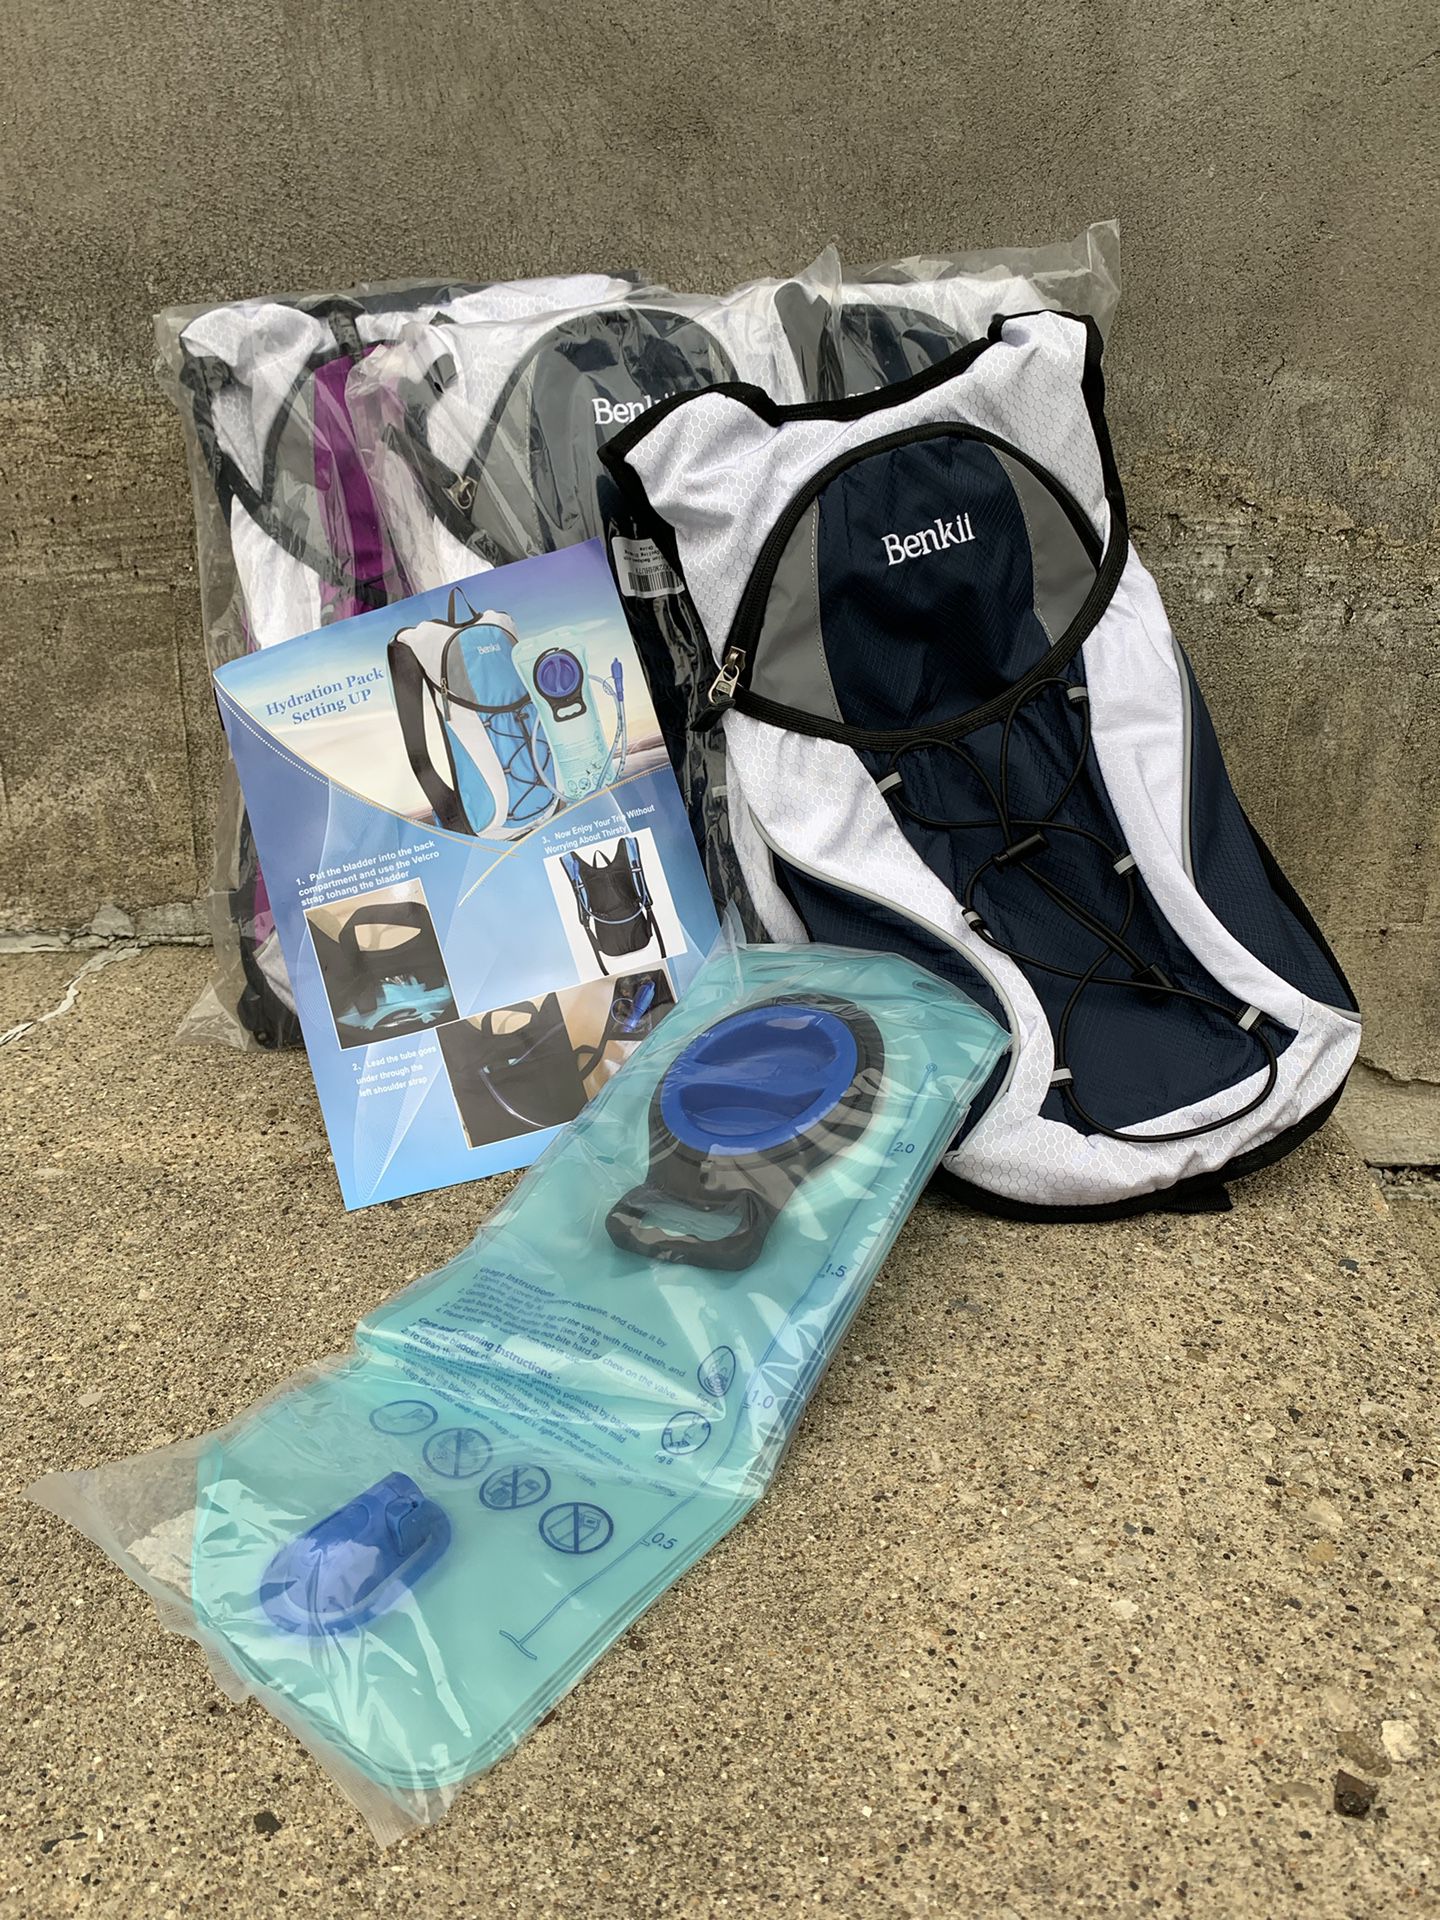 New Hydration Backpack 2L Water Bladder Included 